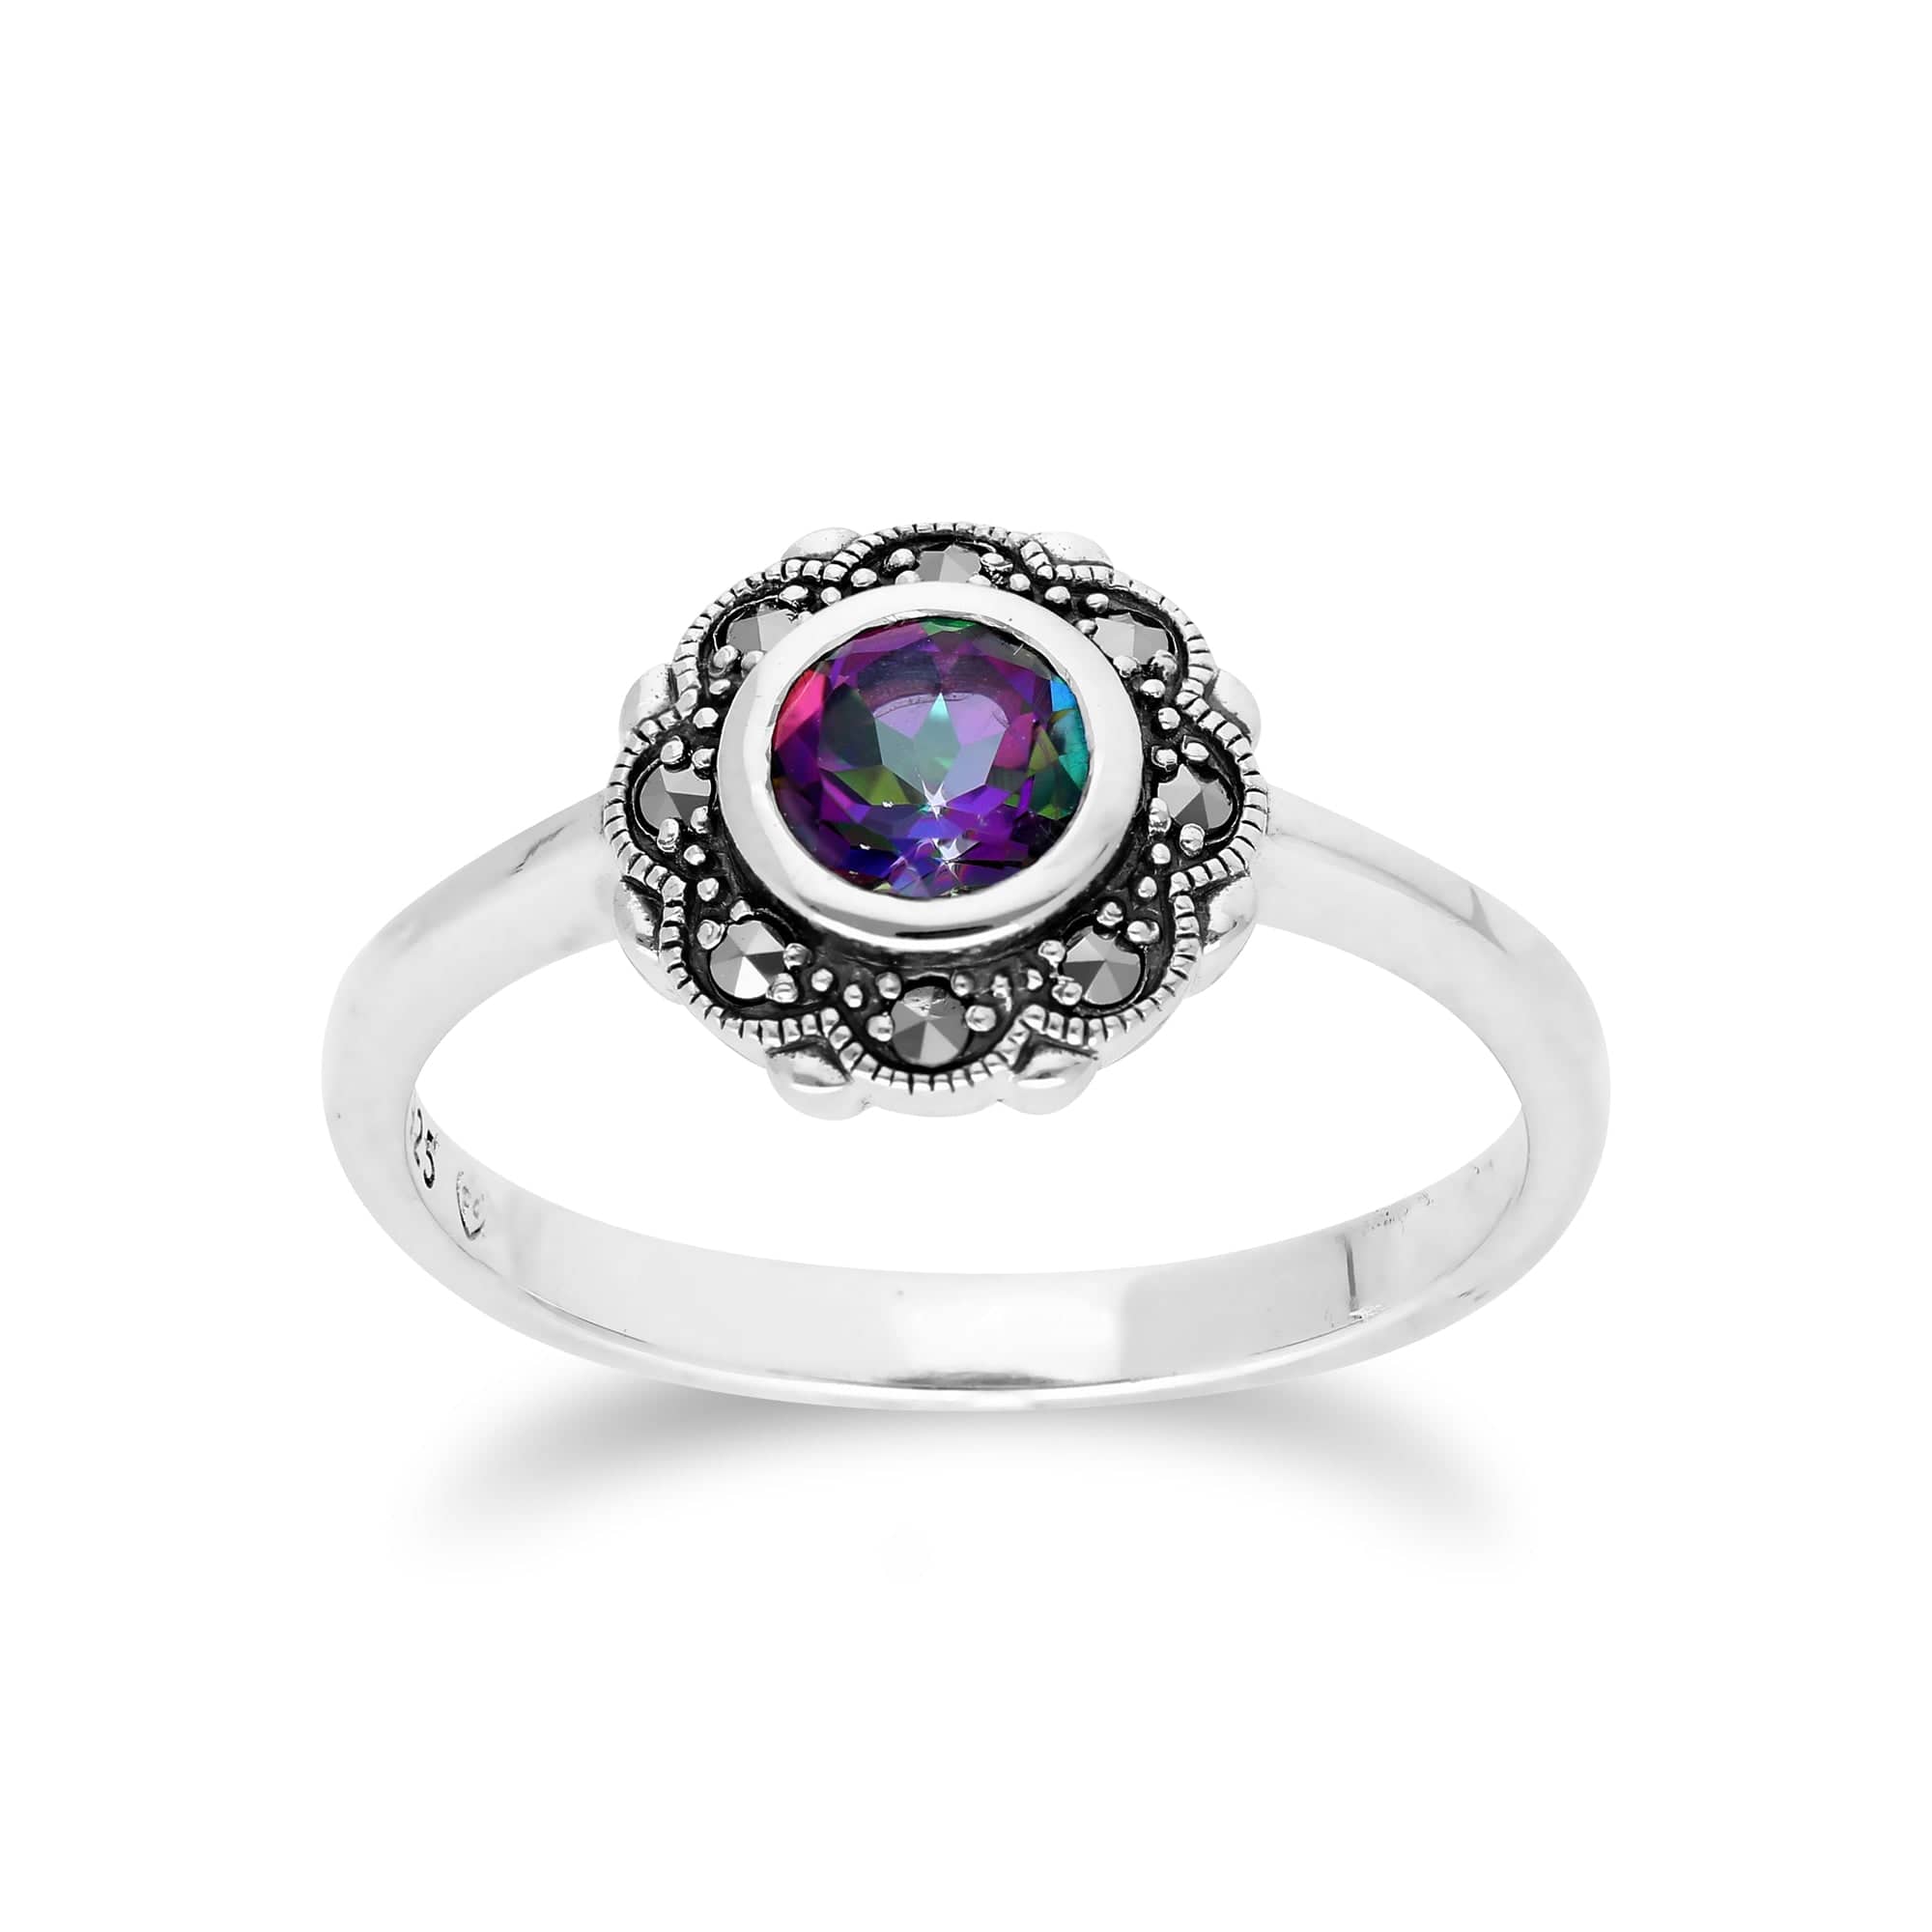 214R597005925 Floral Round Mystic Topaz & Marcasite Halo Ring in 925 Sterling Silver 1